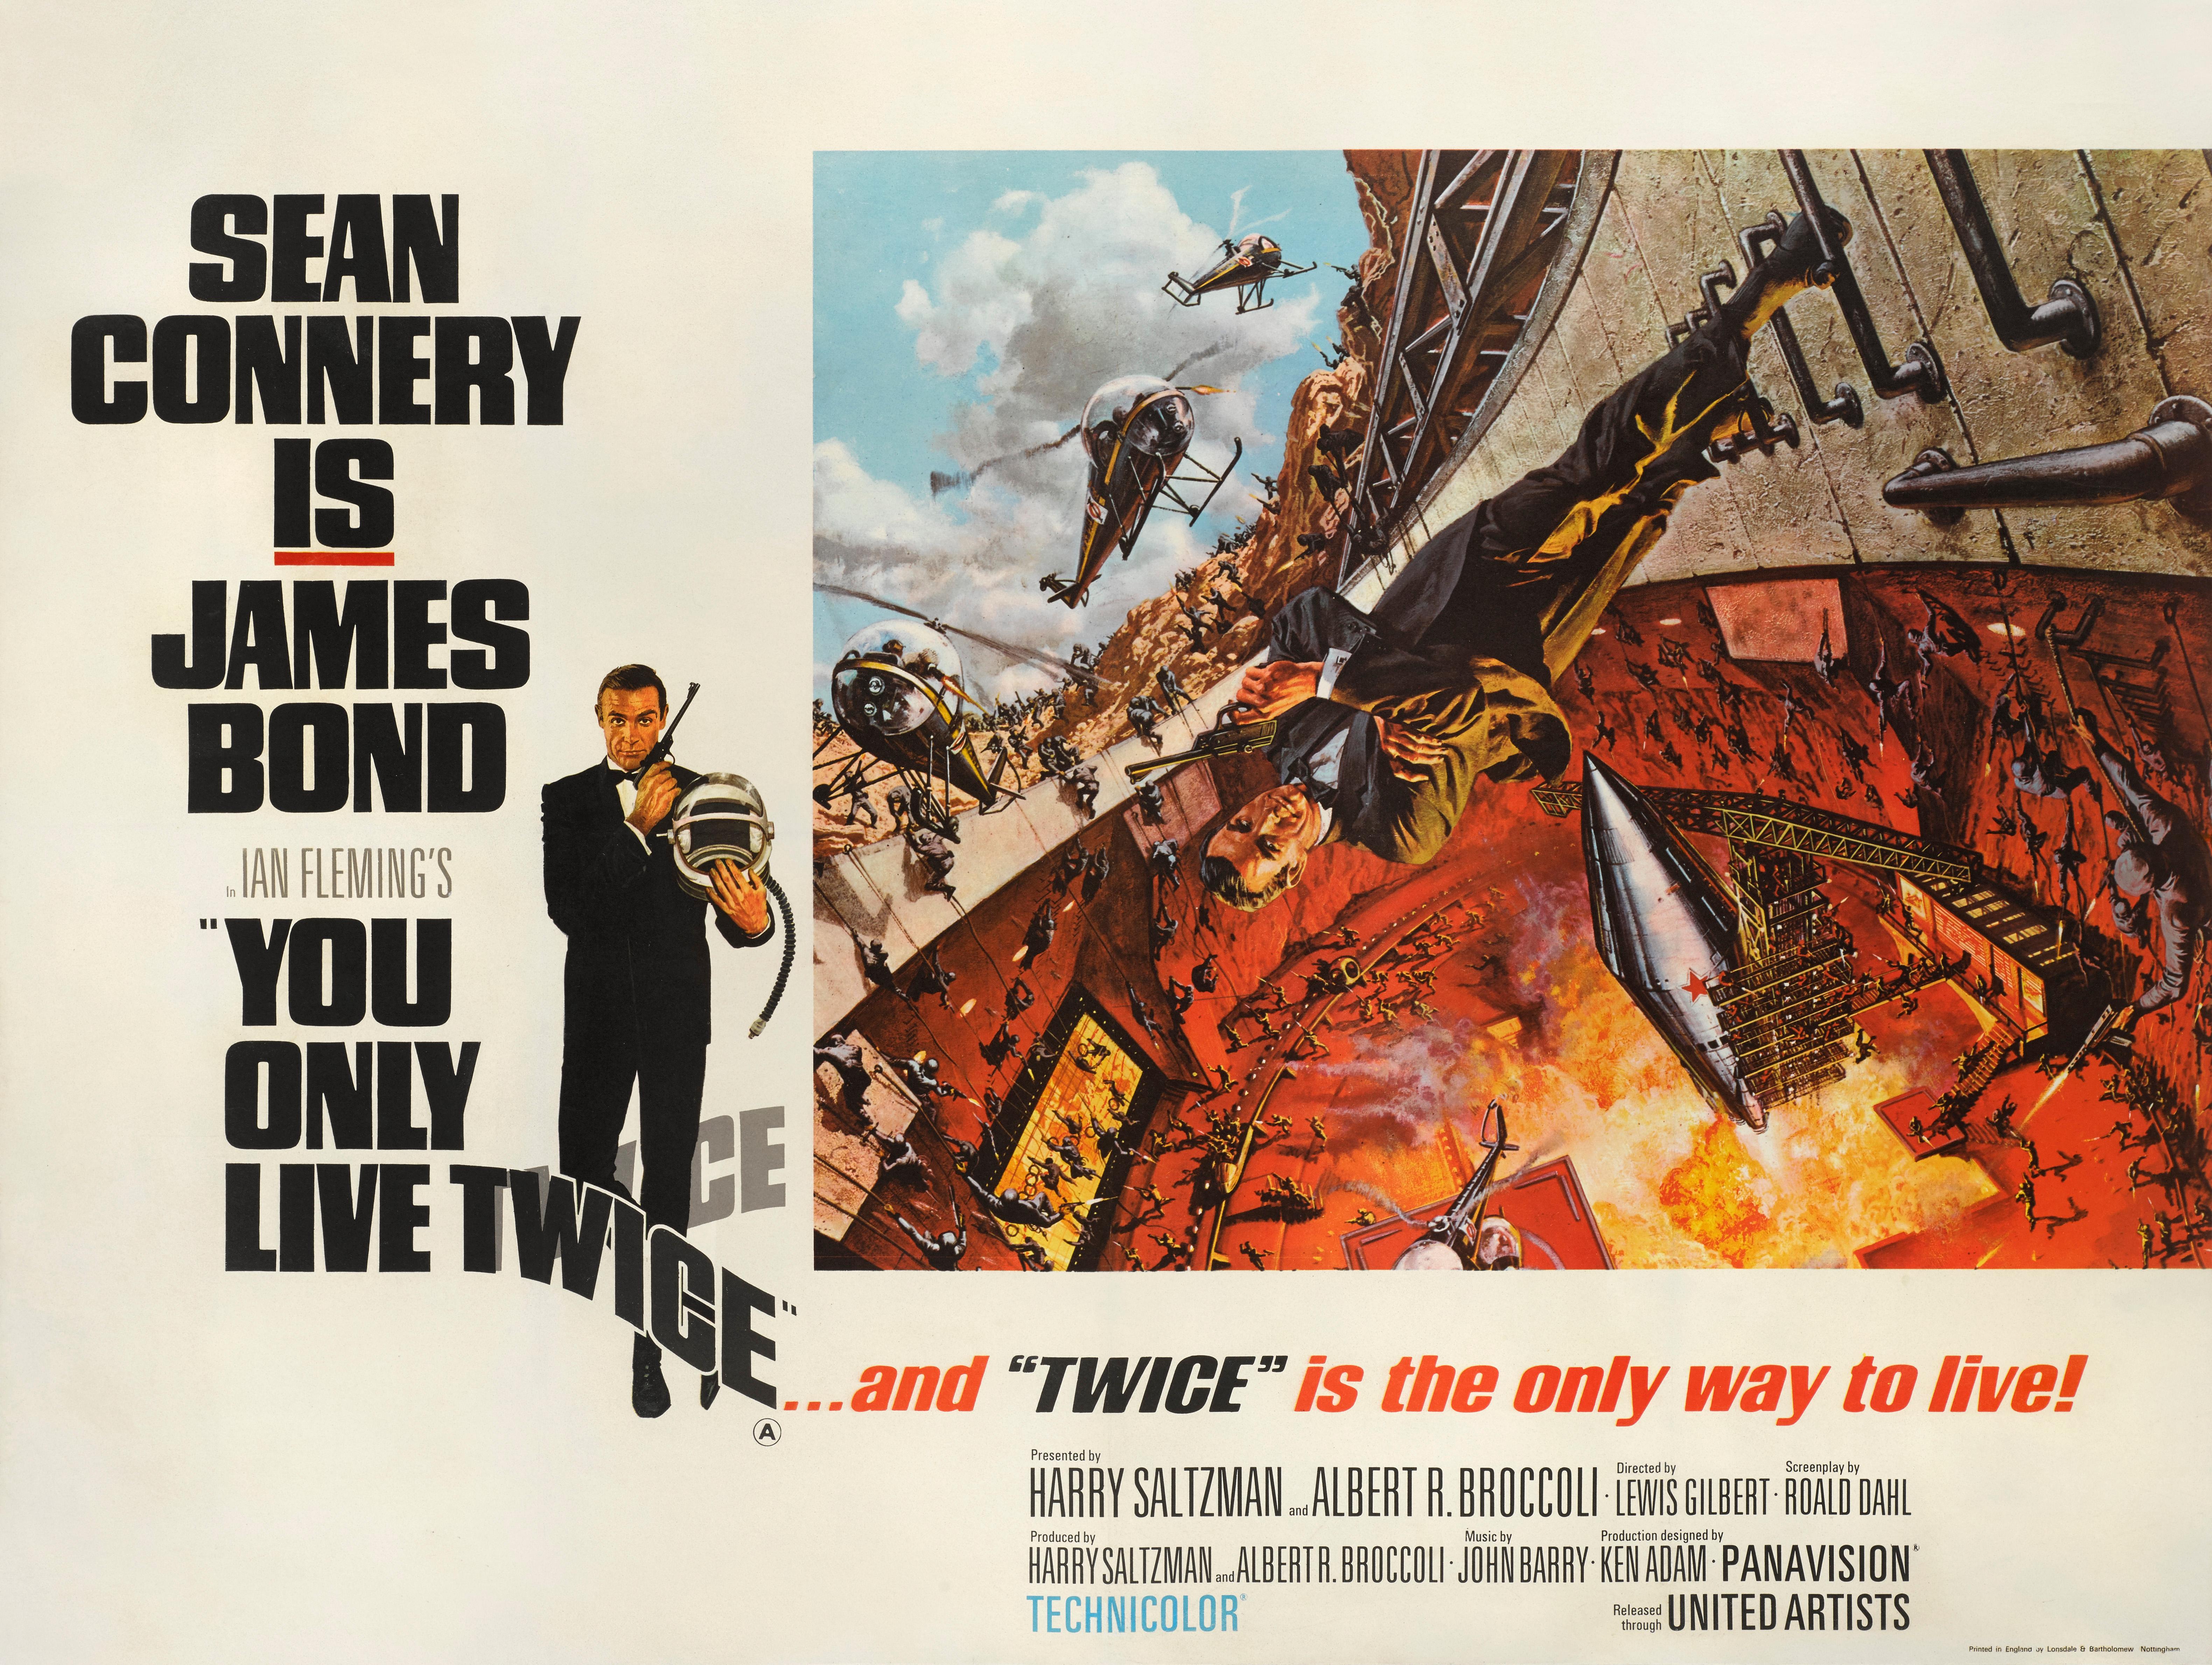 Original British film poster for the fifth James Bond film.
This is one of three different style posters produced to advertise the film in the UK. This is know as Style A (volcano).  This poster is conservation linen-backed, and would be sent out